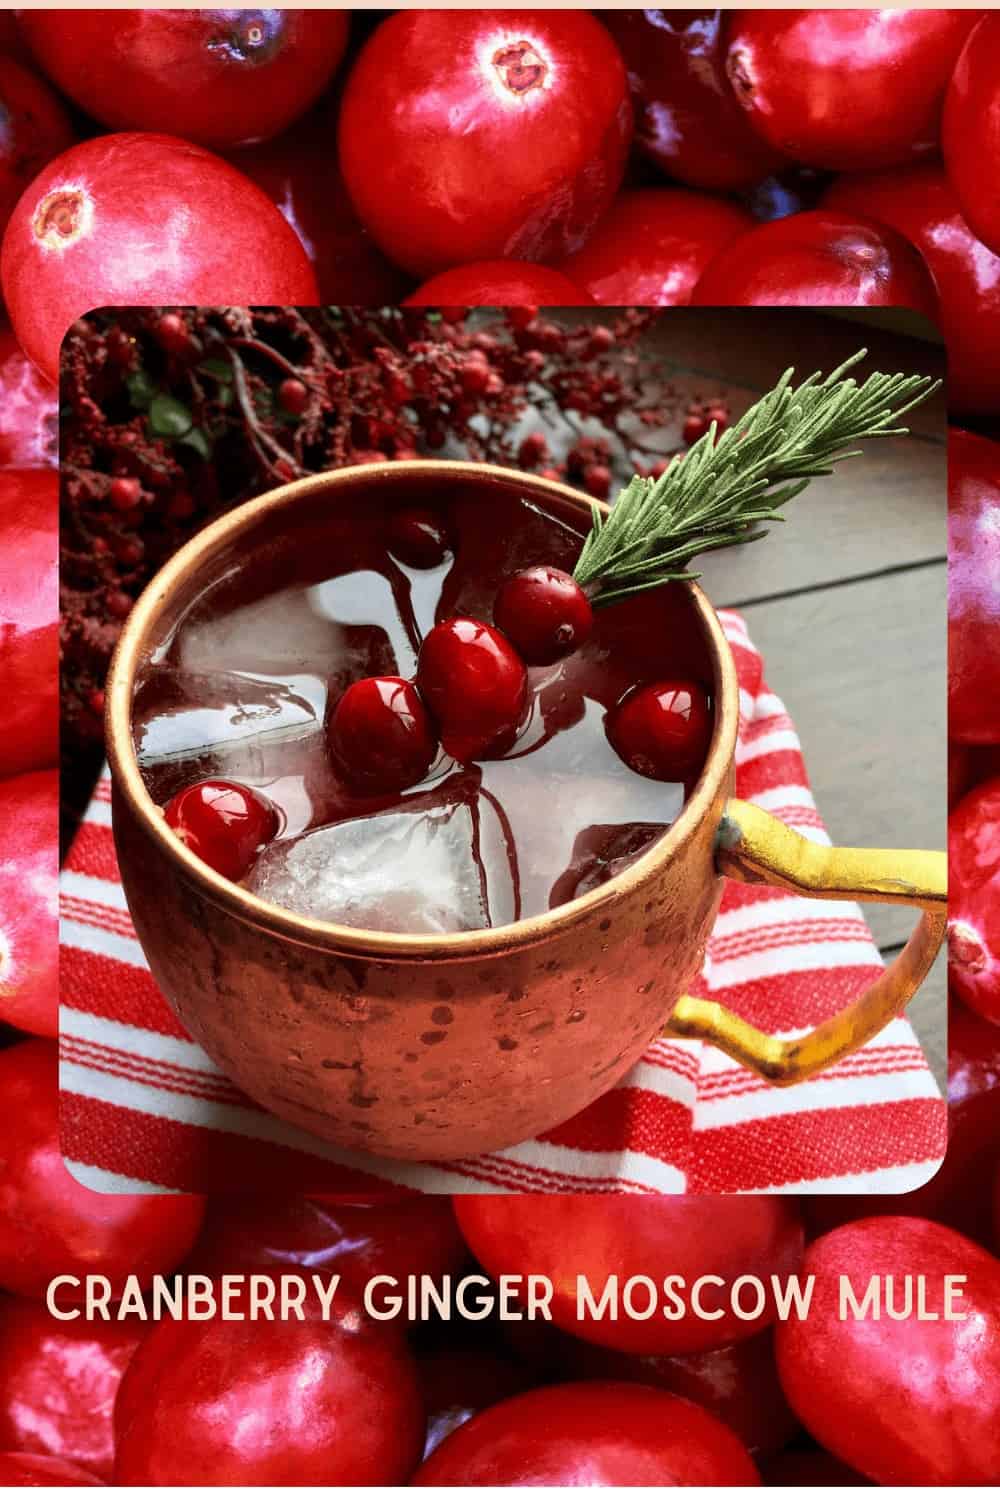 Festive Cranberry Ginger Moscow Mule Cocktails with cranberries behind